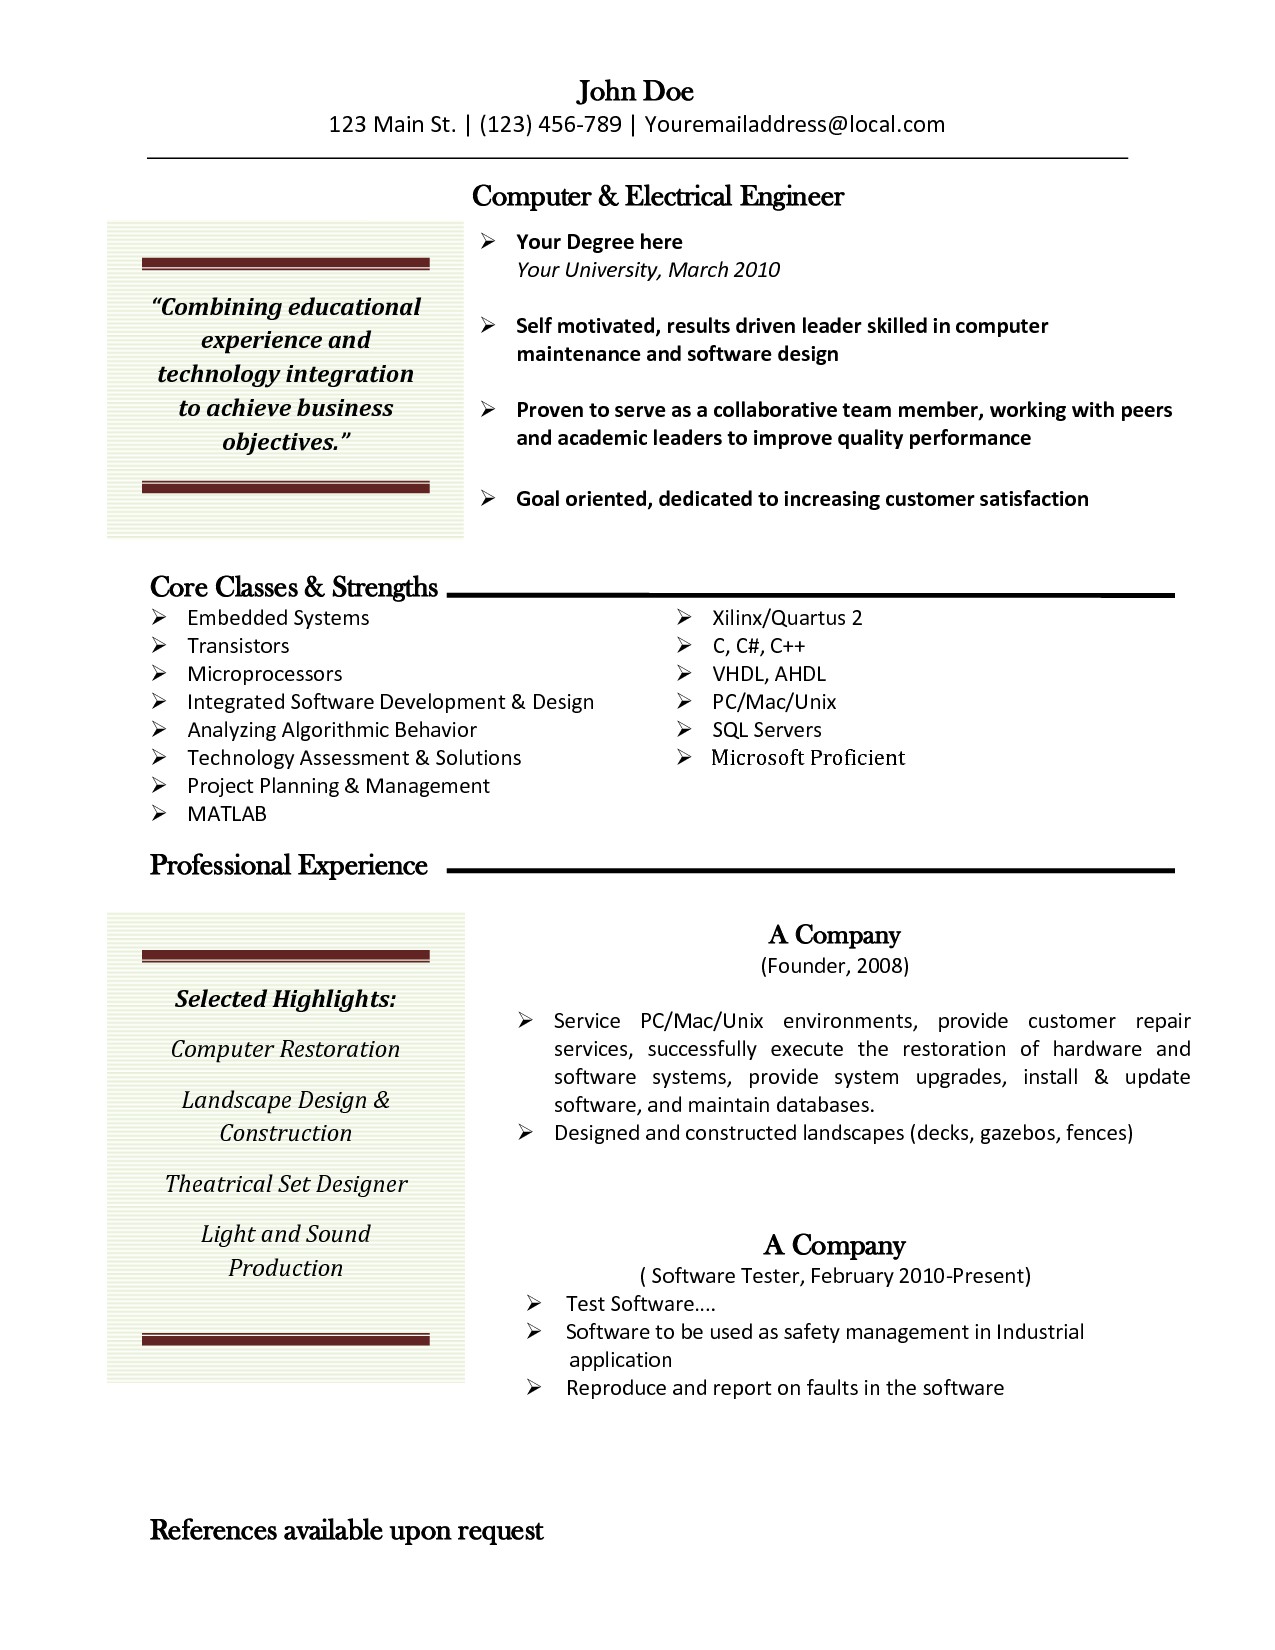 Free Resume Templates For Mac Cqjykibi Png 1275 1650 Cover Online